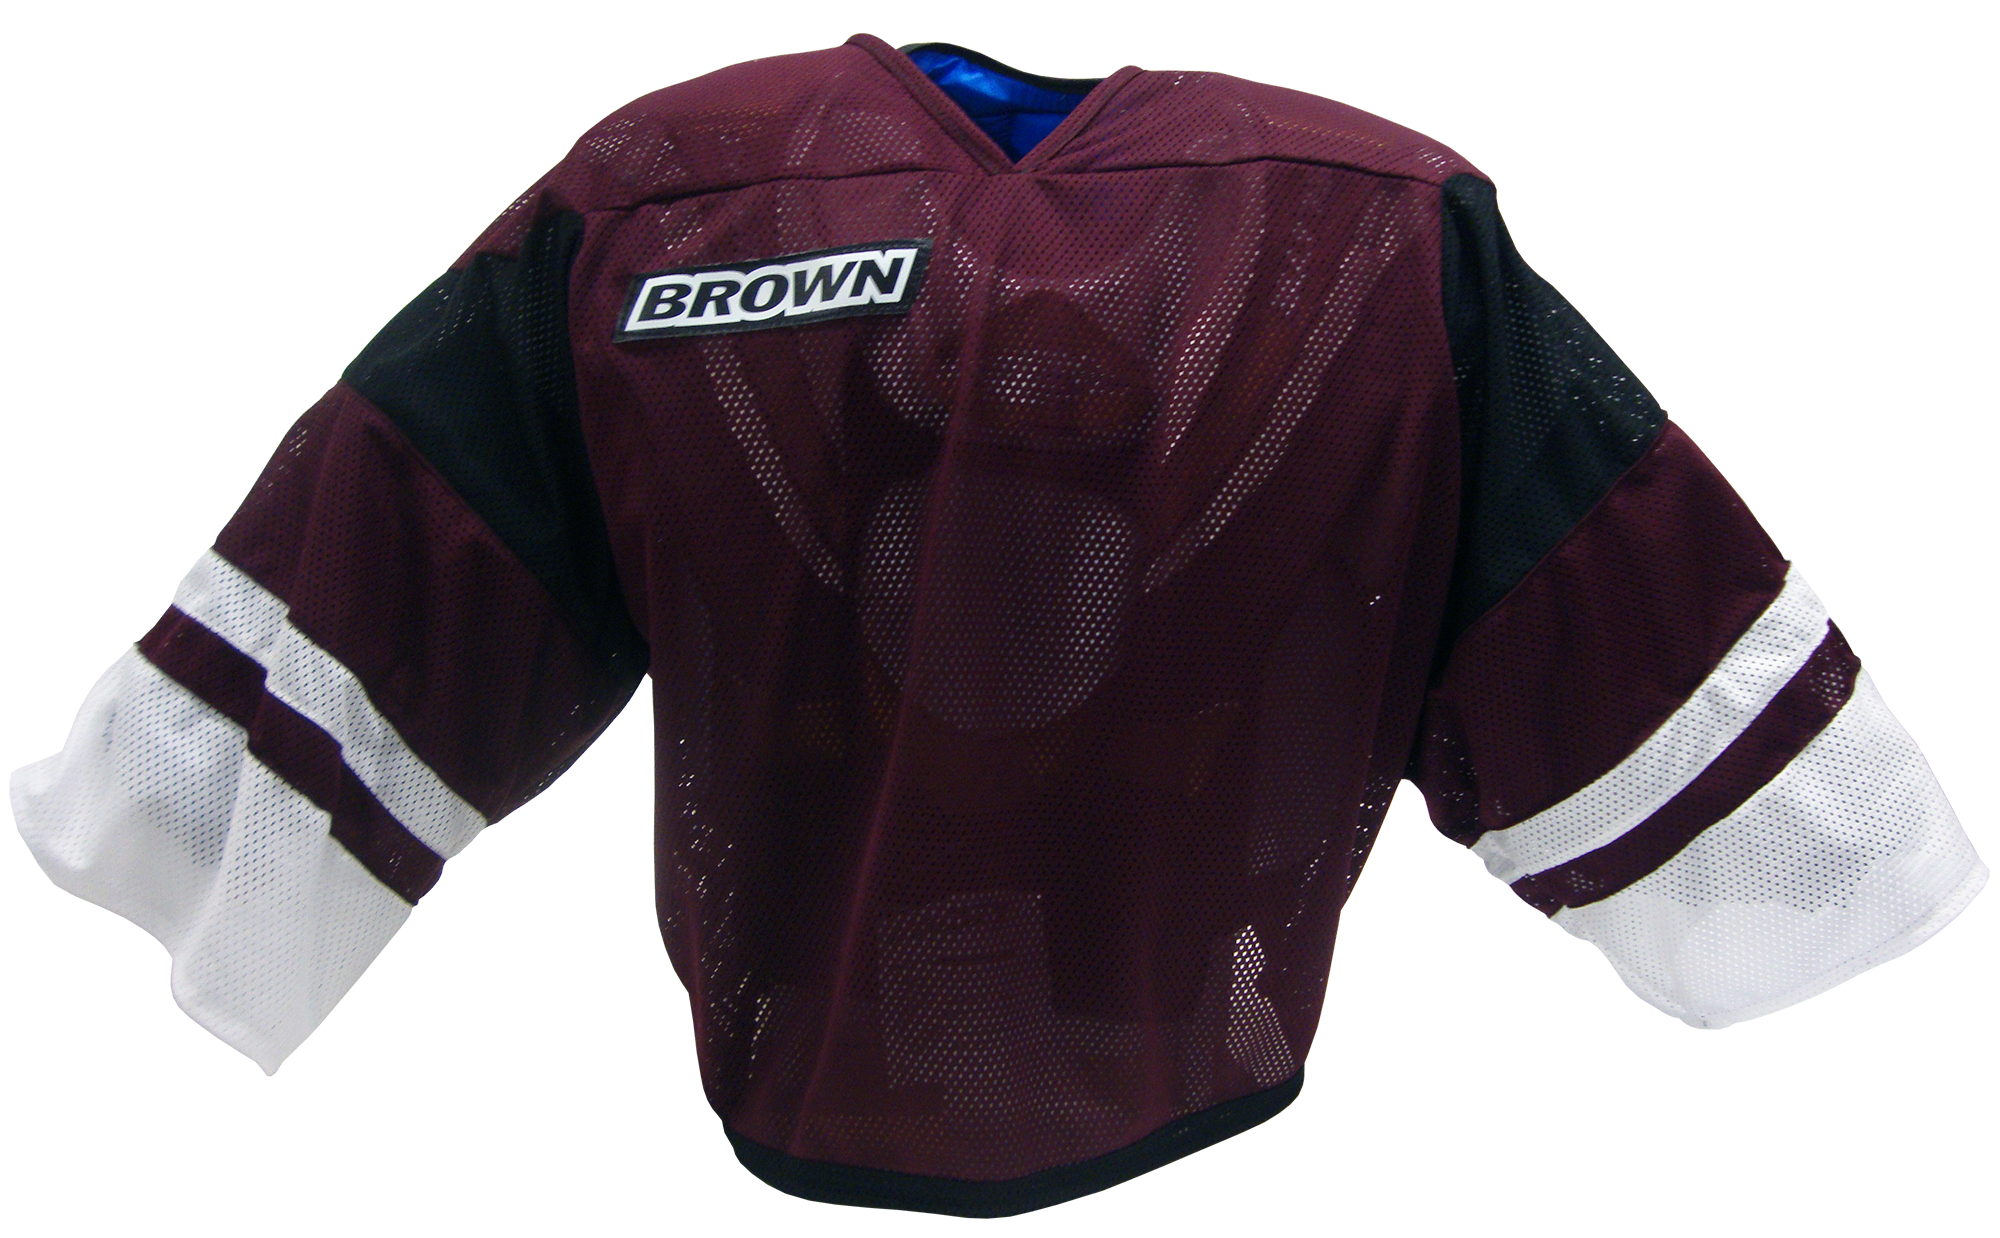 Maroon, black and white jersey